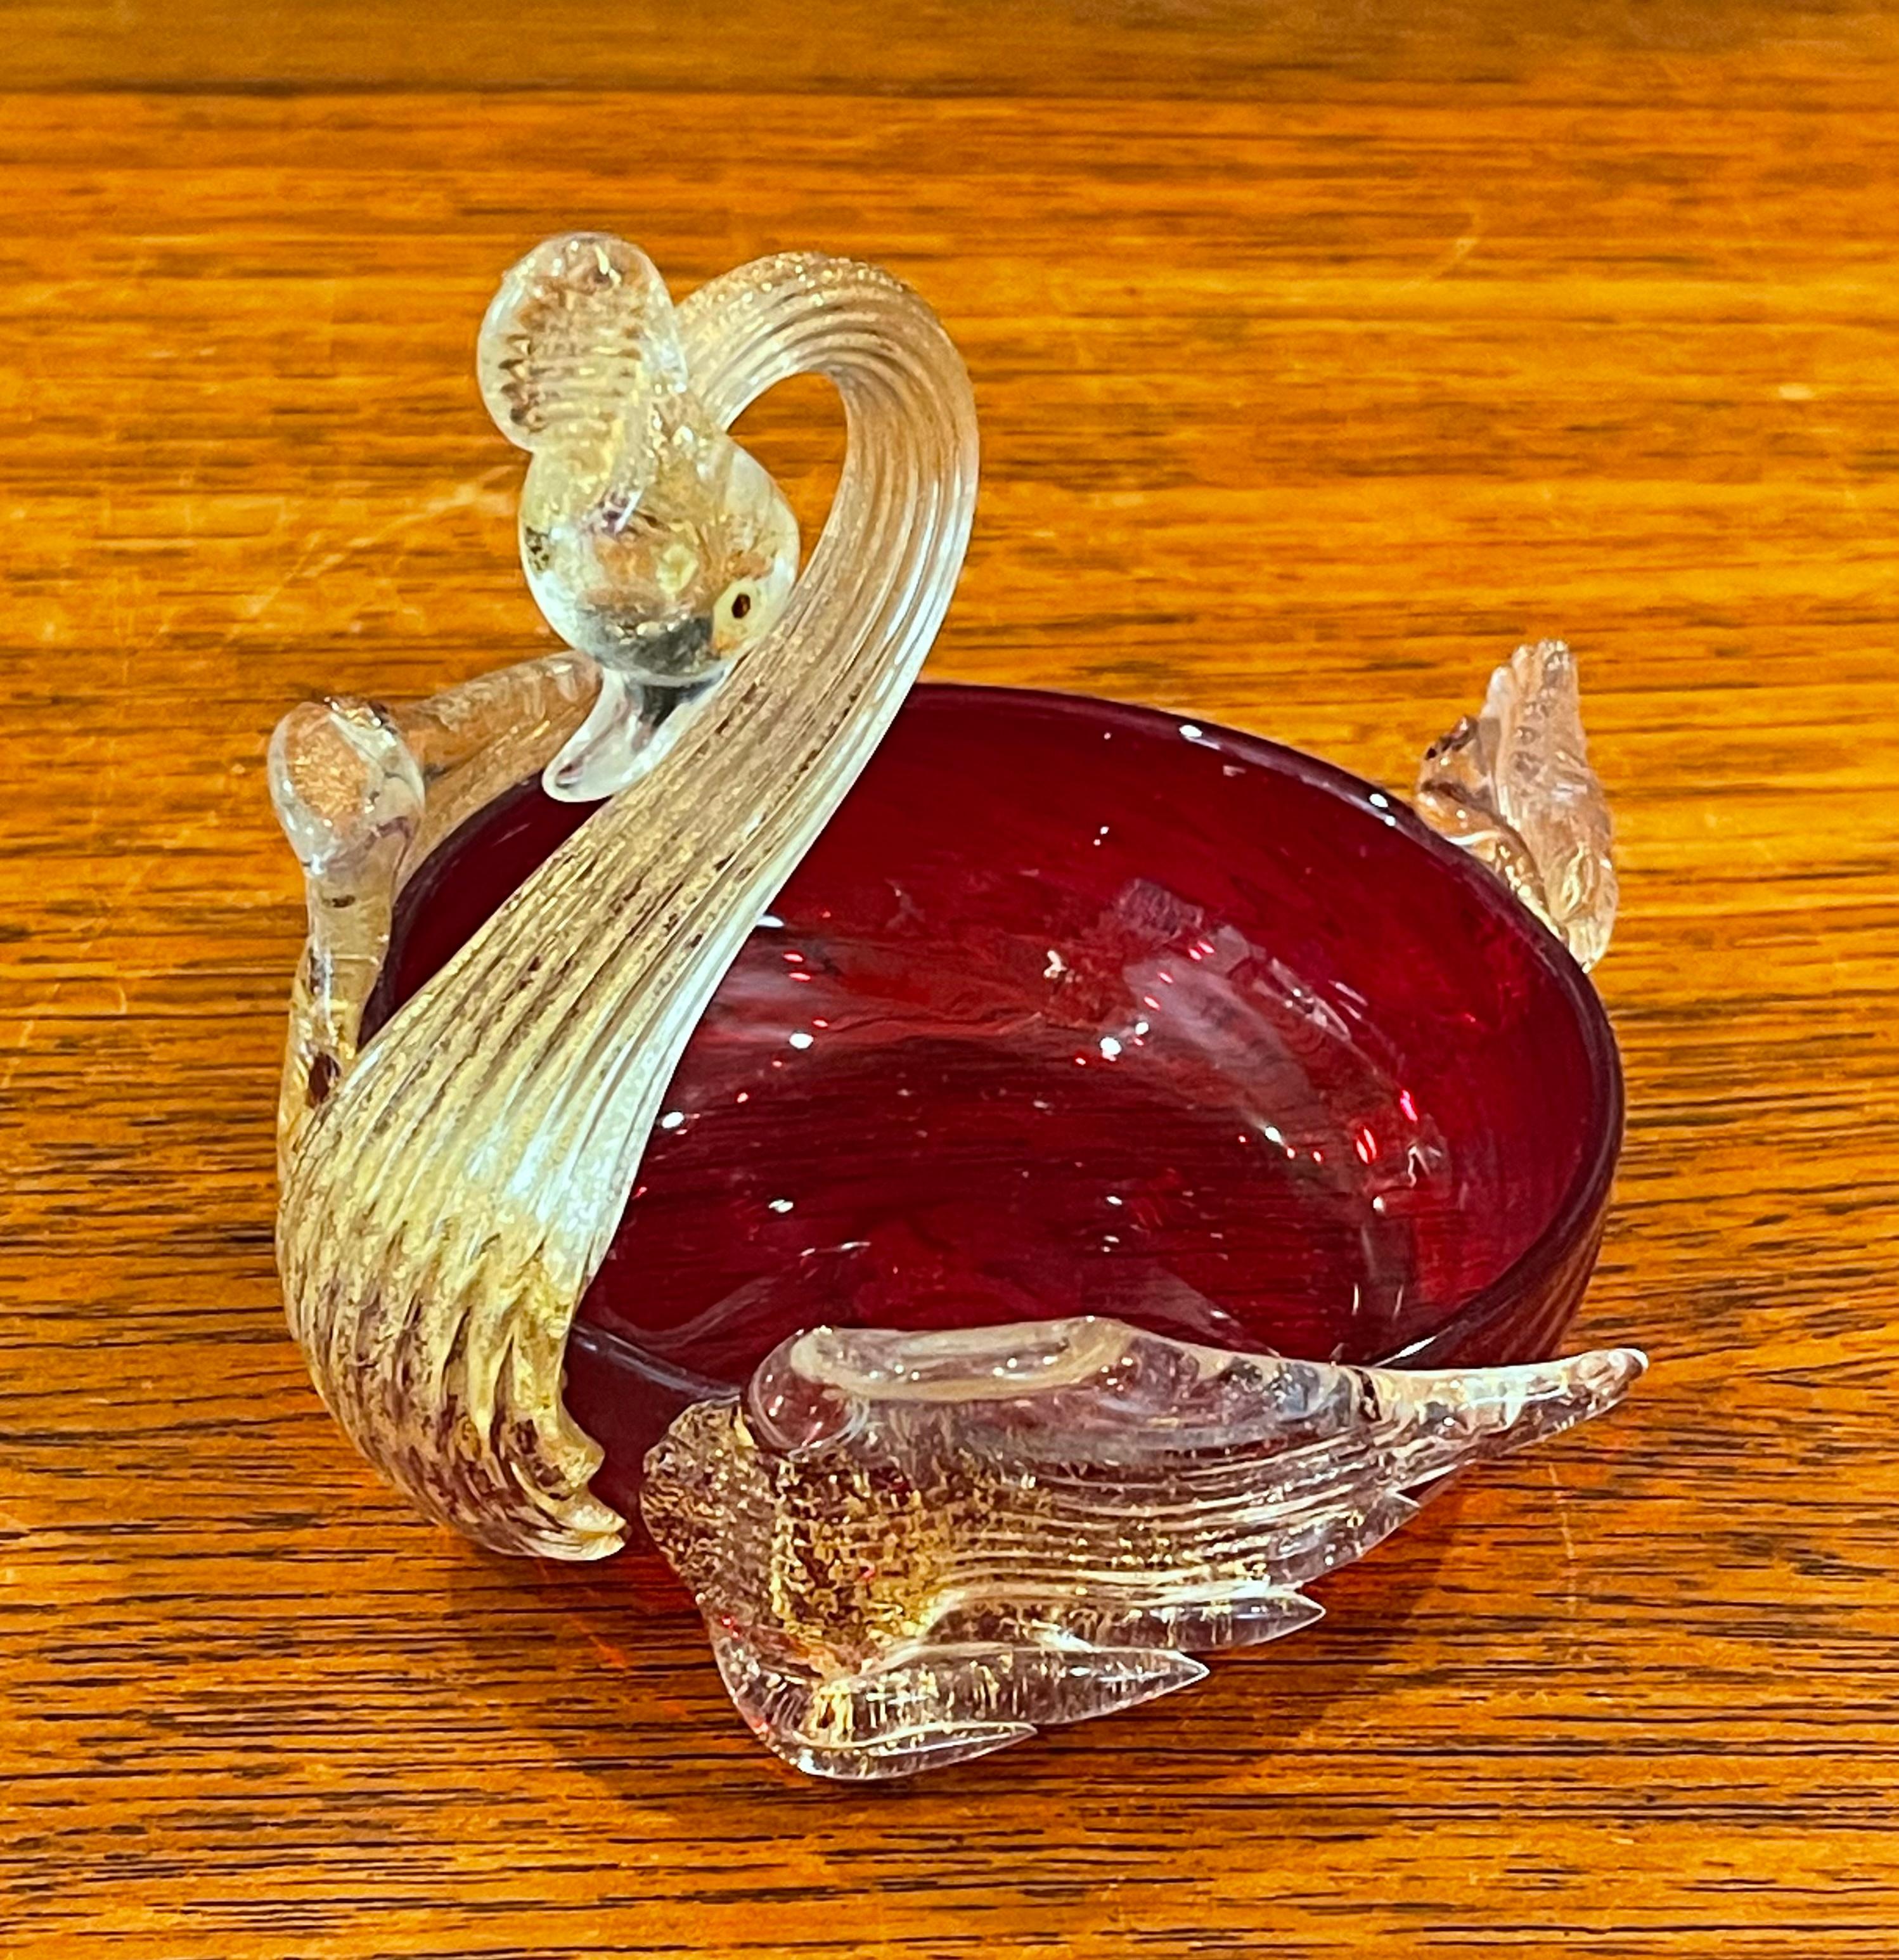 Stylish petite swan art glass trinket dish by Murano glass, circa 1970s. The is in very good condition with no chips or cracks and measures 4